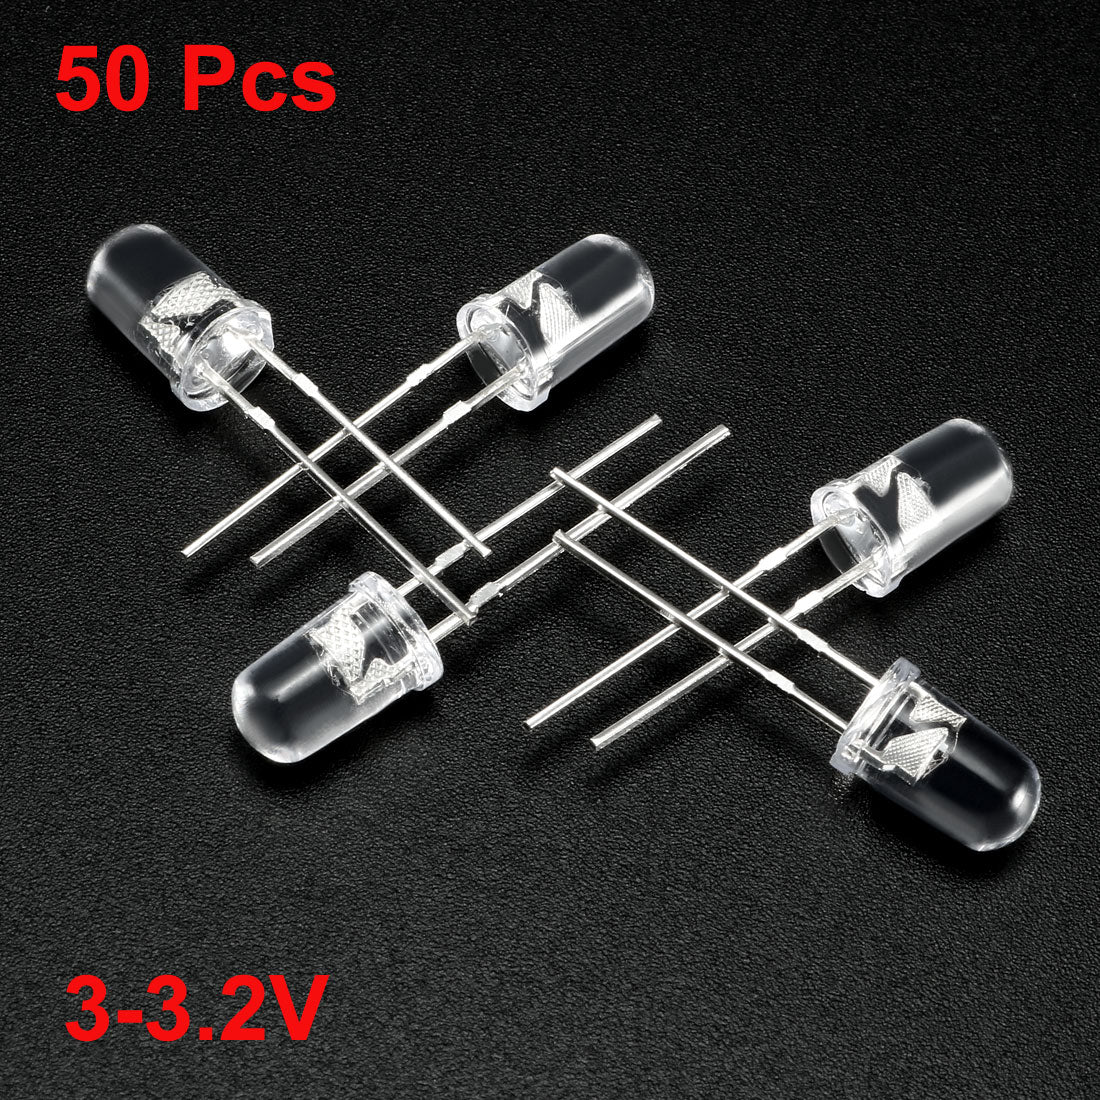 uxcell Uxcell 50pcs 5mm Multicolor Fast Flashing Dynamics LED Diode Lights Bright Lighting Bulb Lamps Electronics Components Filcker Light Emitting Diodes 3-3.2V